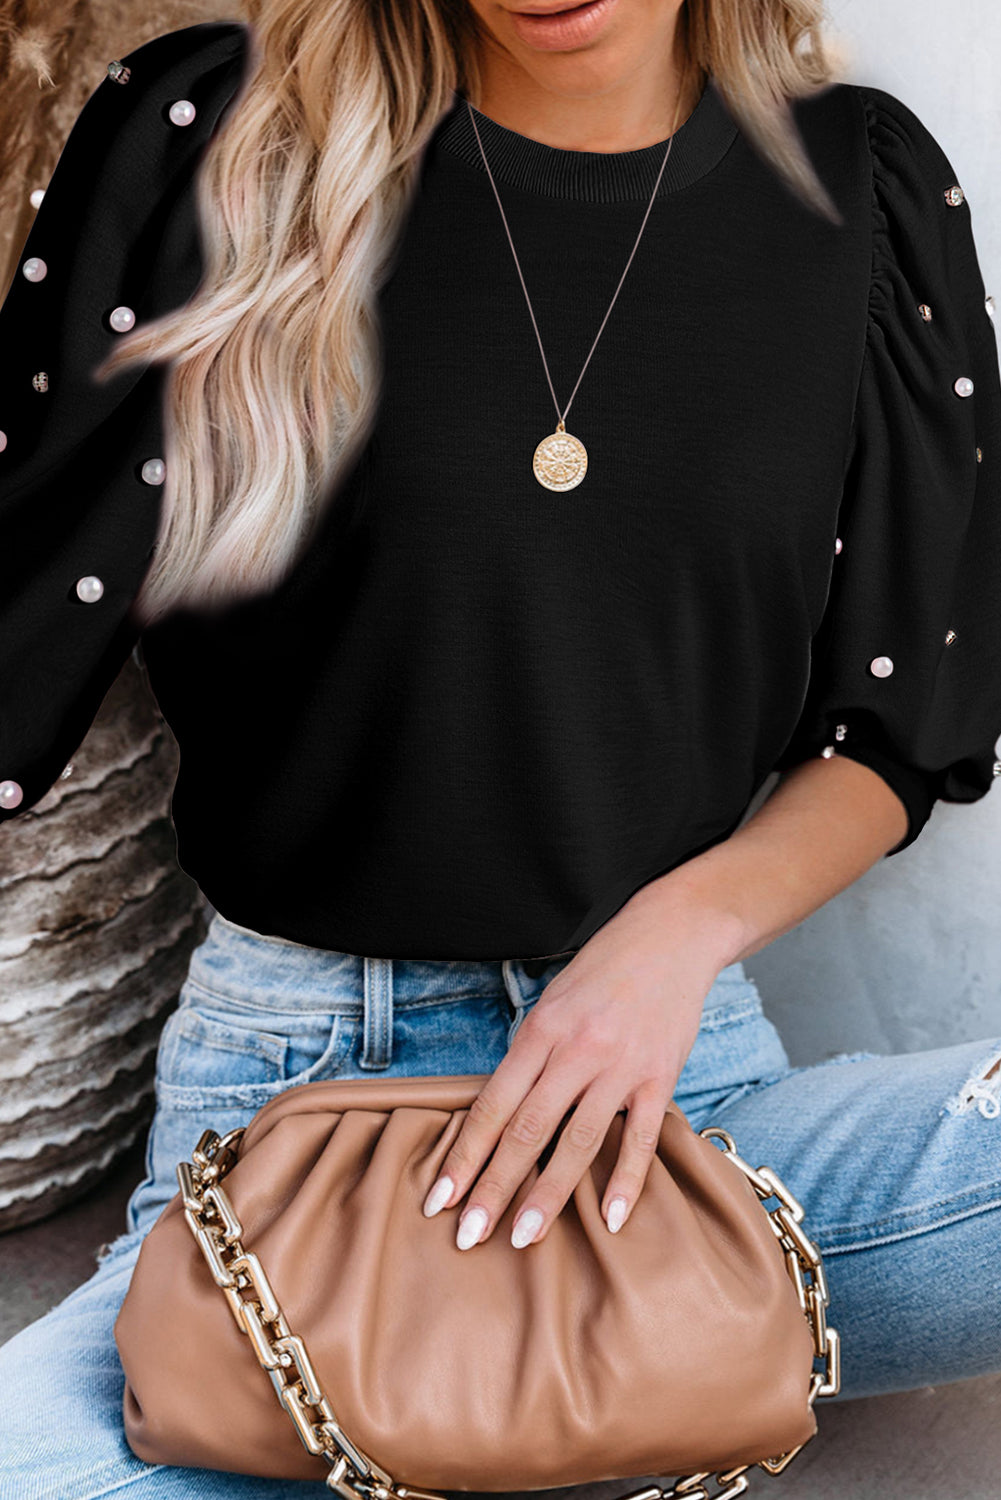 Pearl Detail Round Neck Half Sleeve Blouse